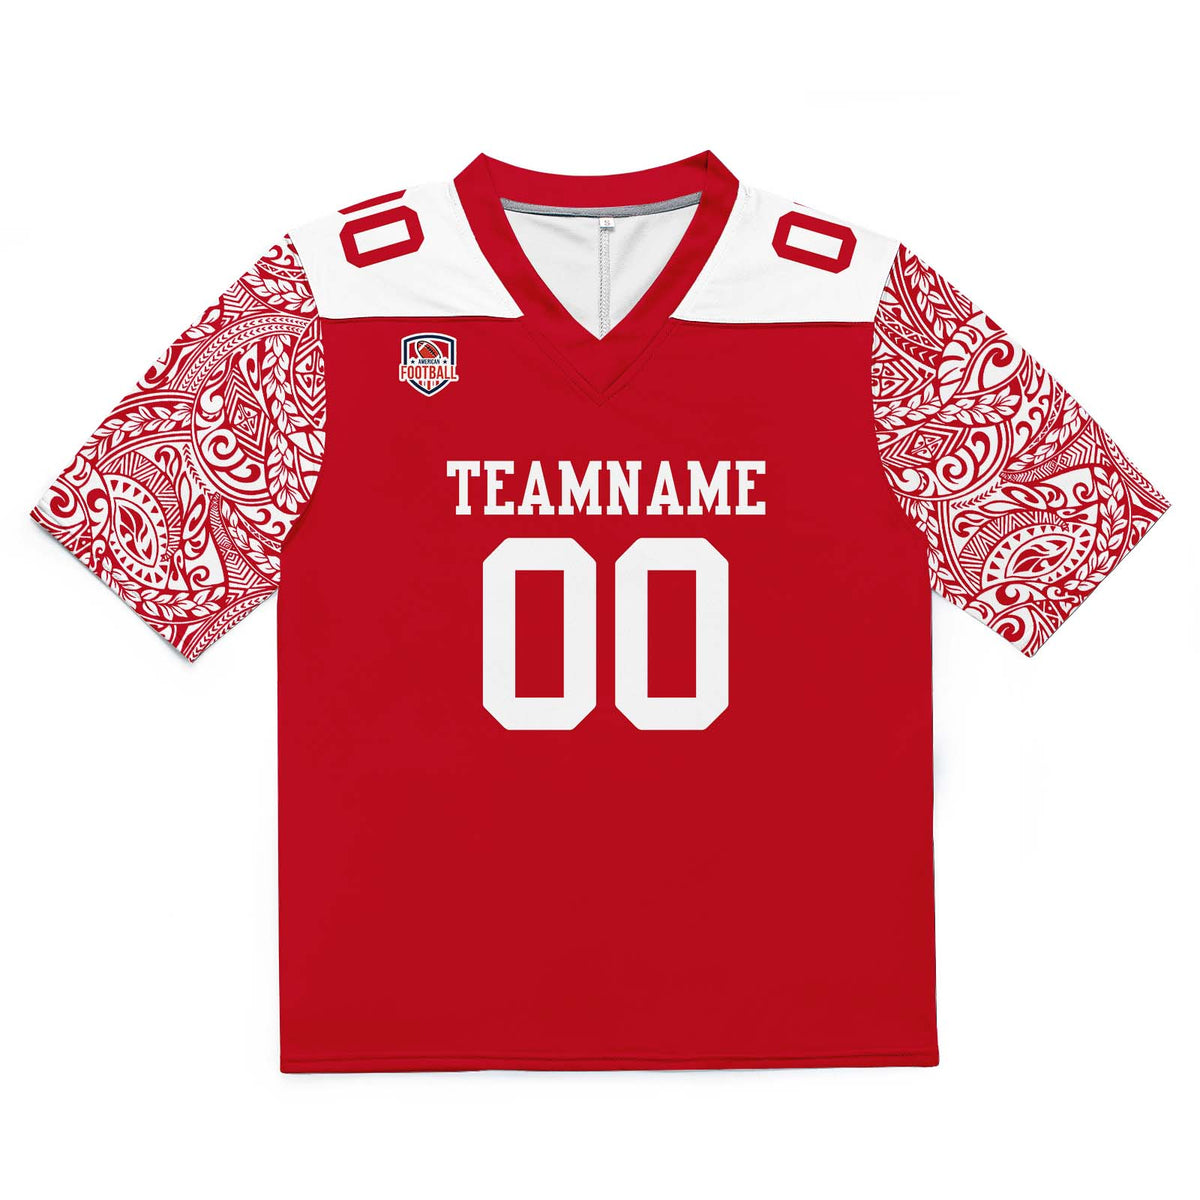 Custom Football Jersey Shirt Personalized Stitched Printed Team Name Number Red&White